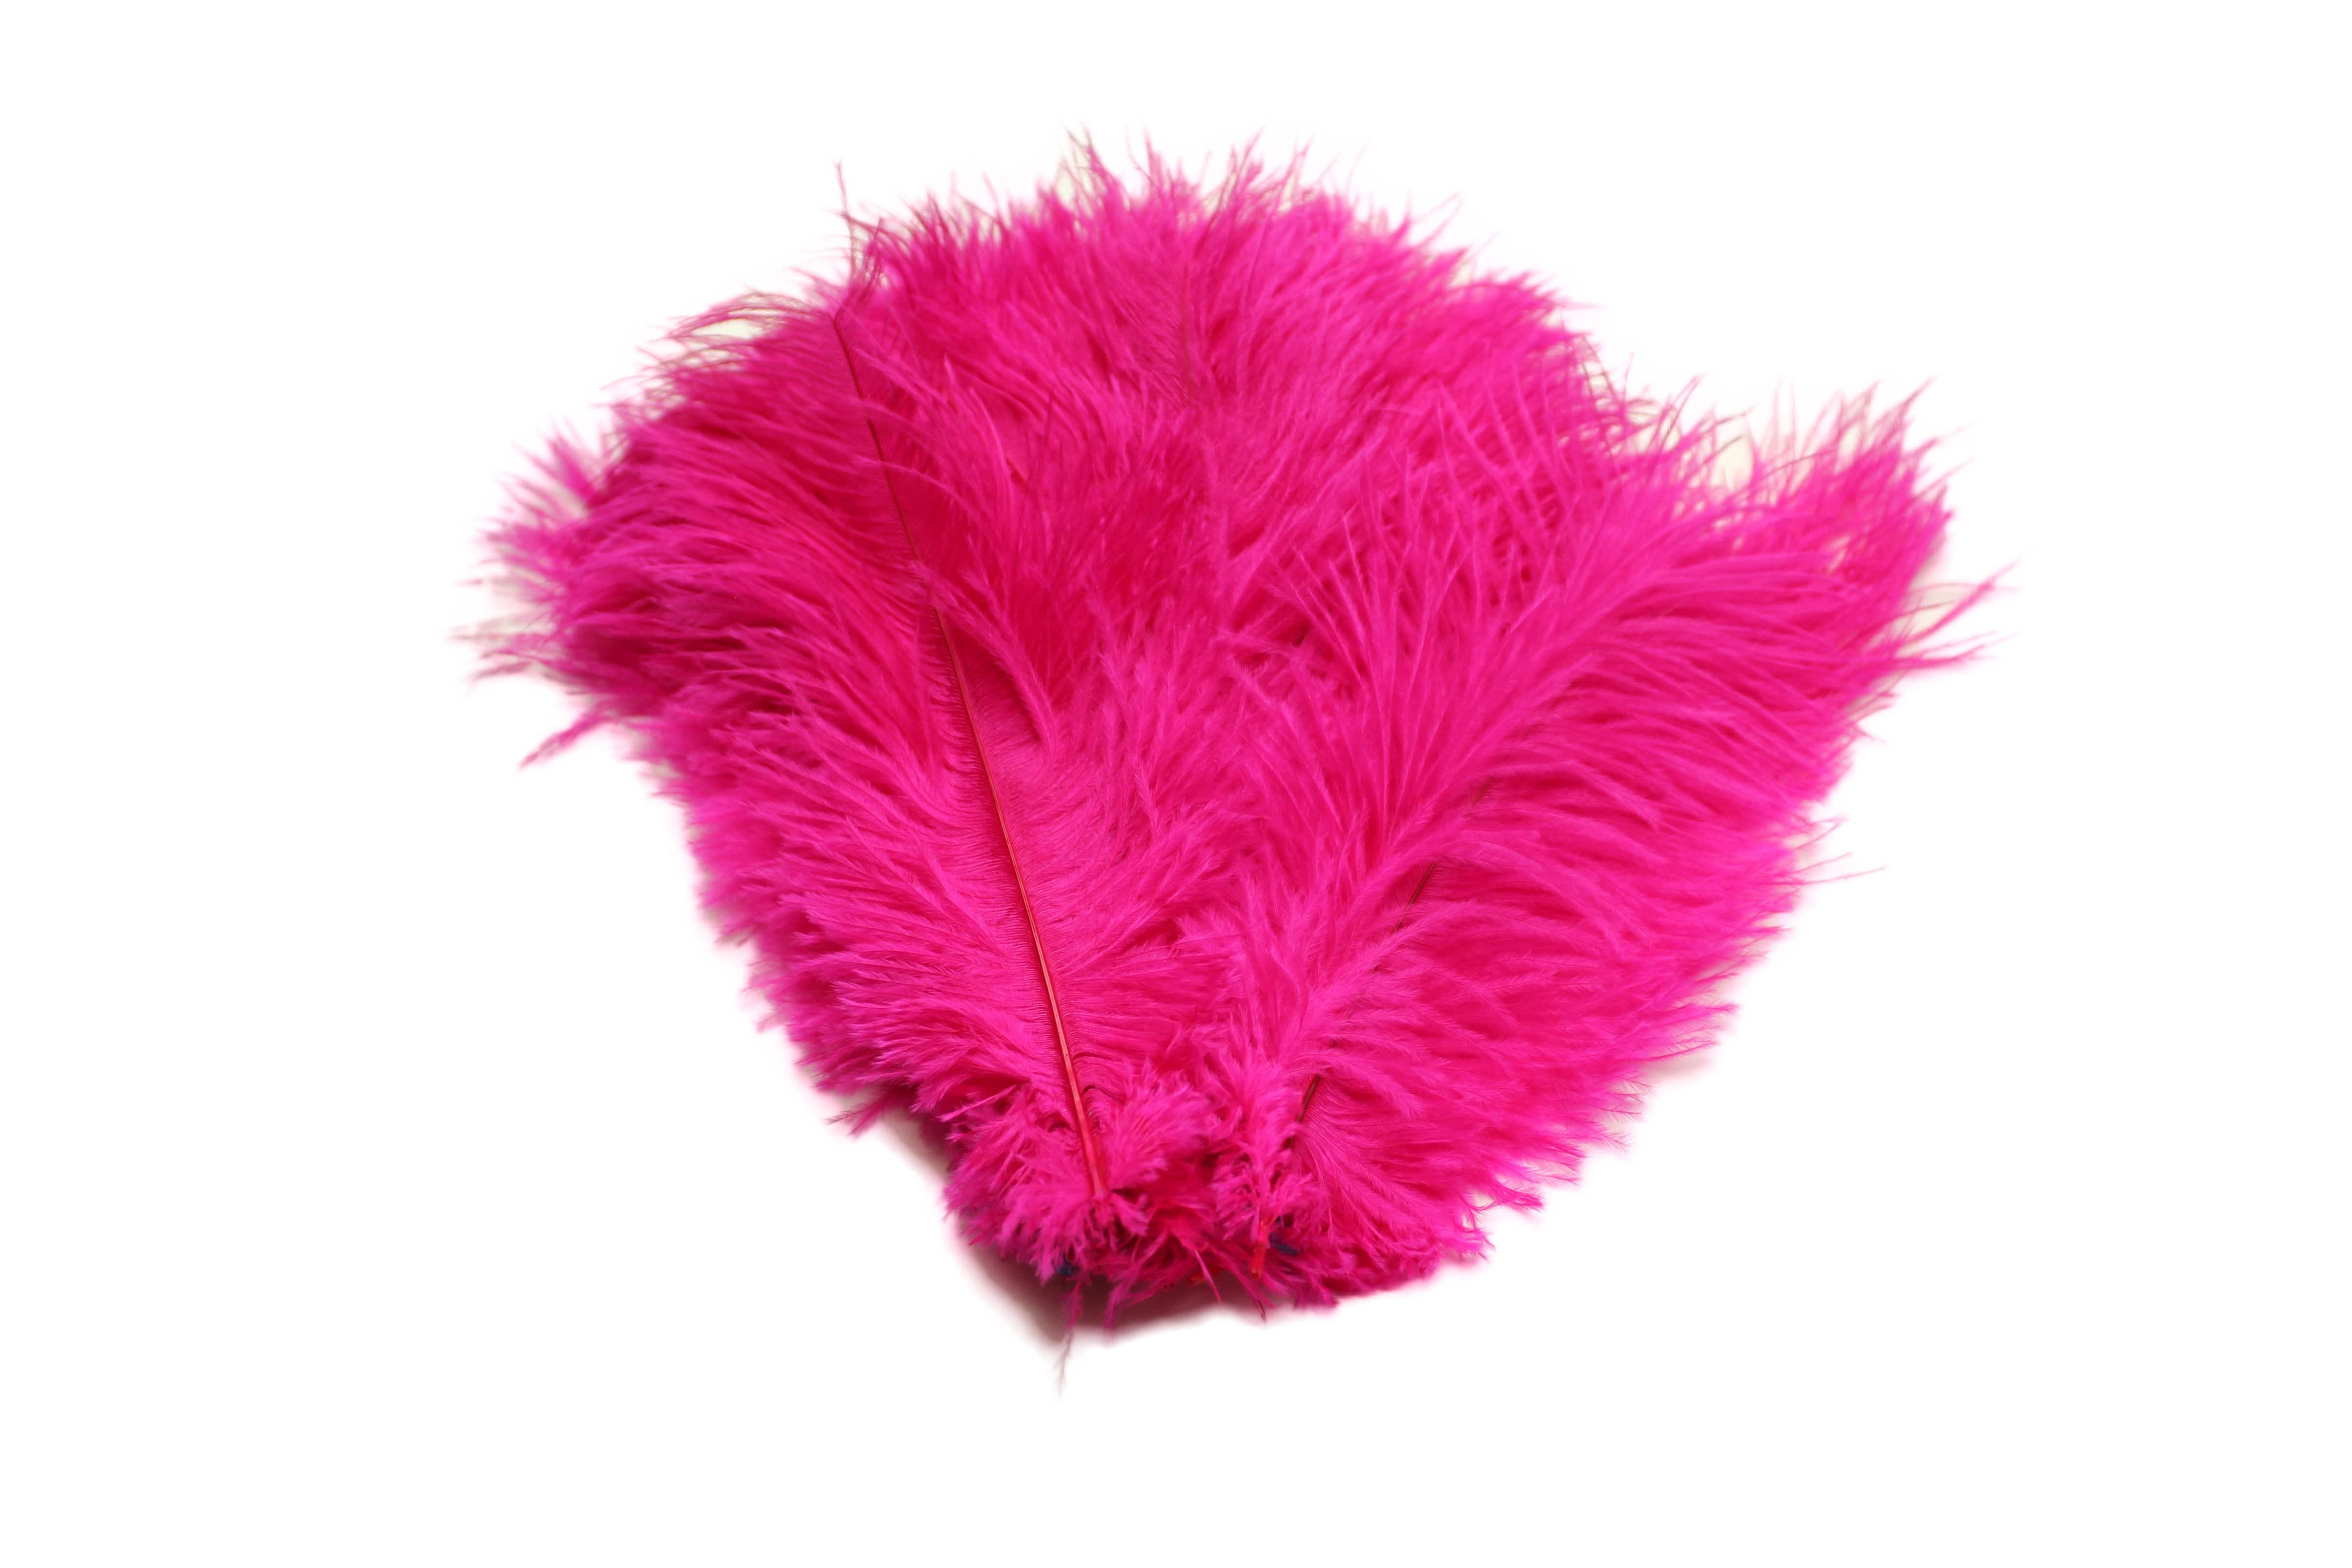 Ostrich Flexible Feathers 13-16 (Red) for Sale Online